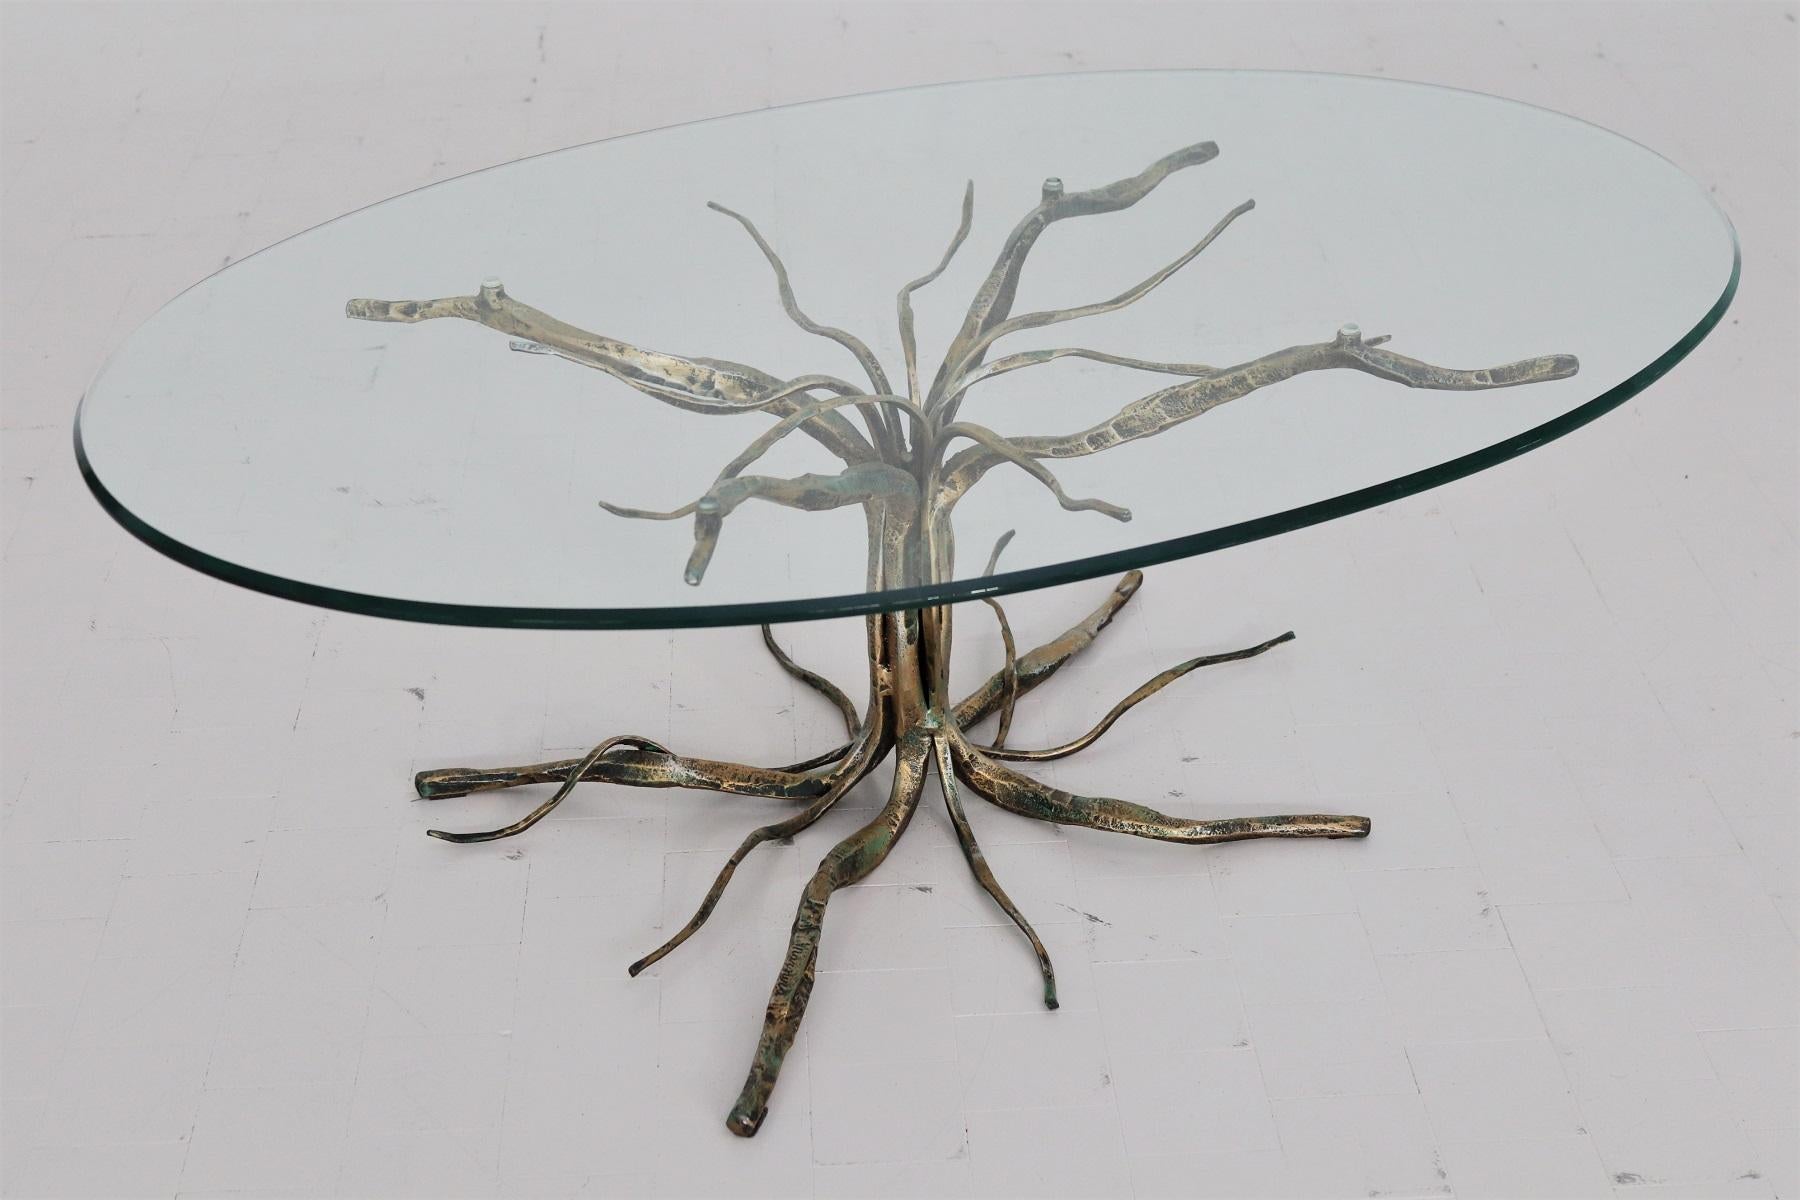 Italian Brutalist Coffee Table in Tree Shape by Salvino Marsura 1960s For Sale 8